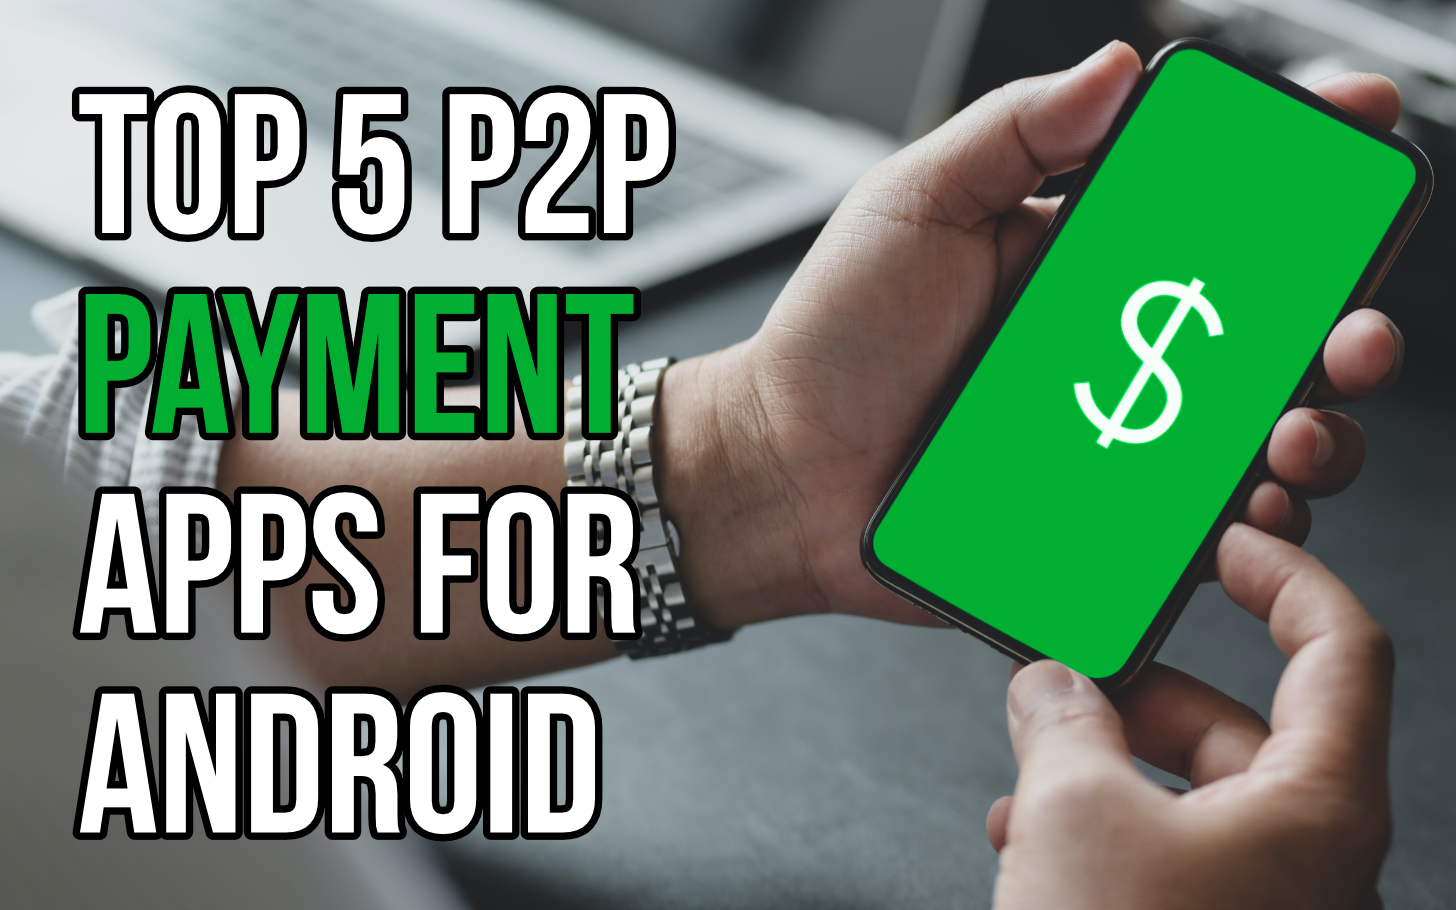 Top 5 peer to peer P2P payment apps for Android Hero